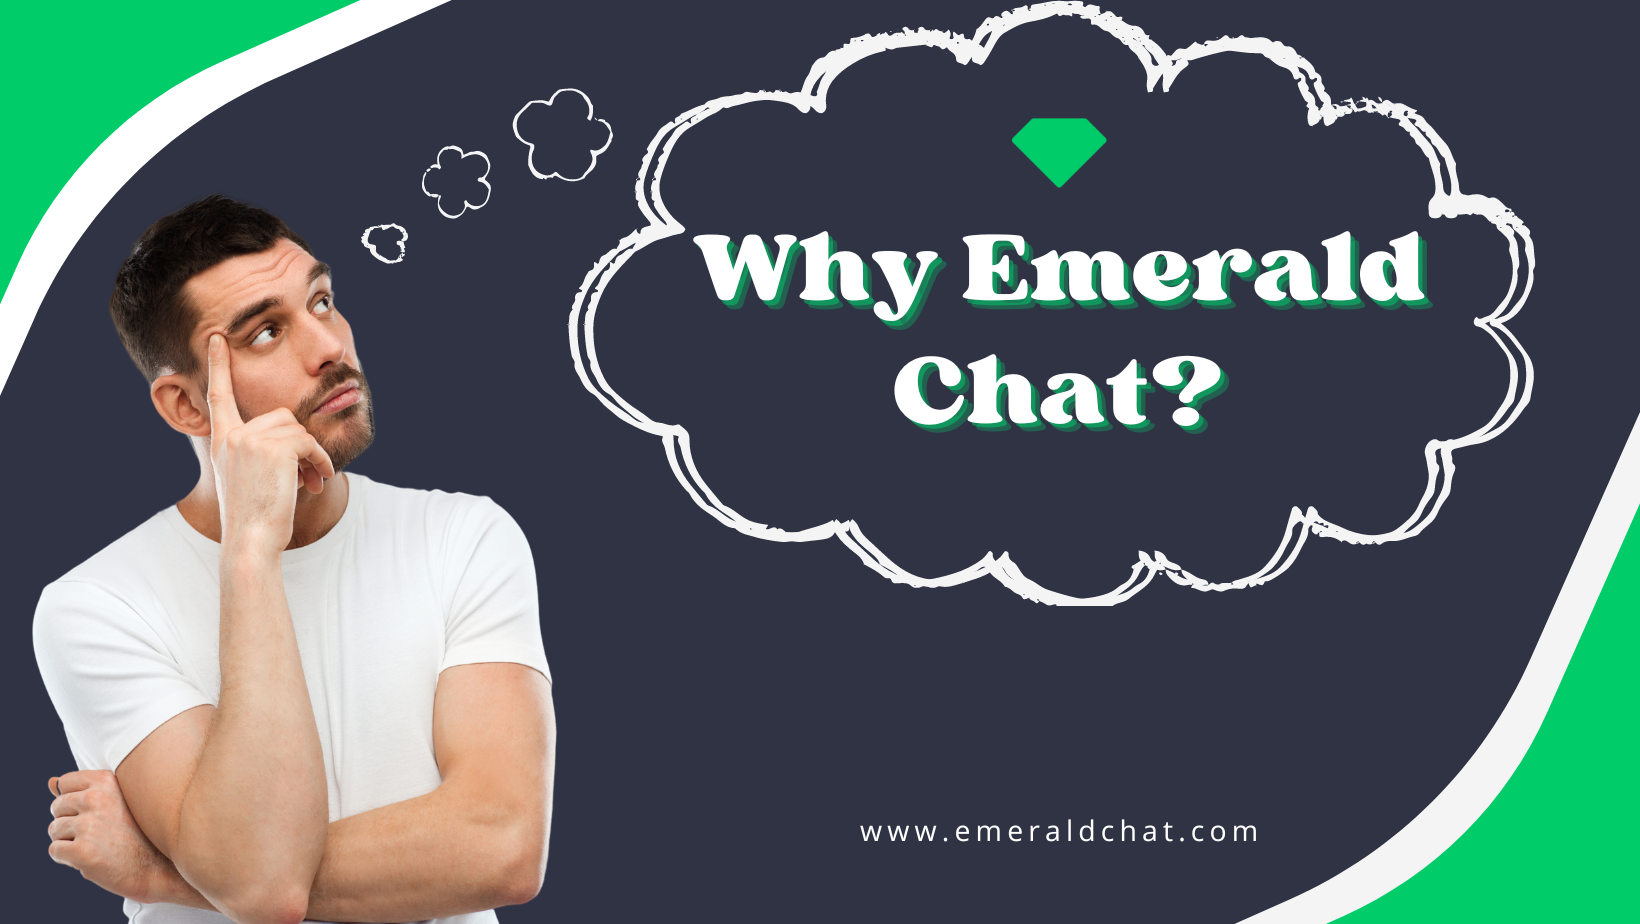 Emerald Chat vs. Other Random Chat Platforms: What Makes it Stand Out?